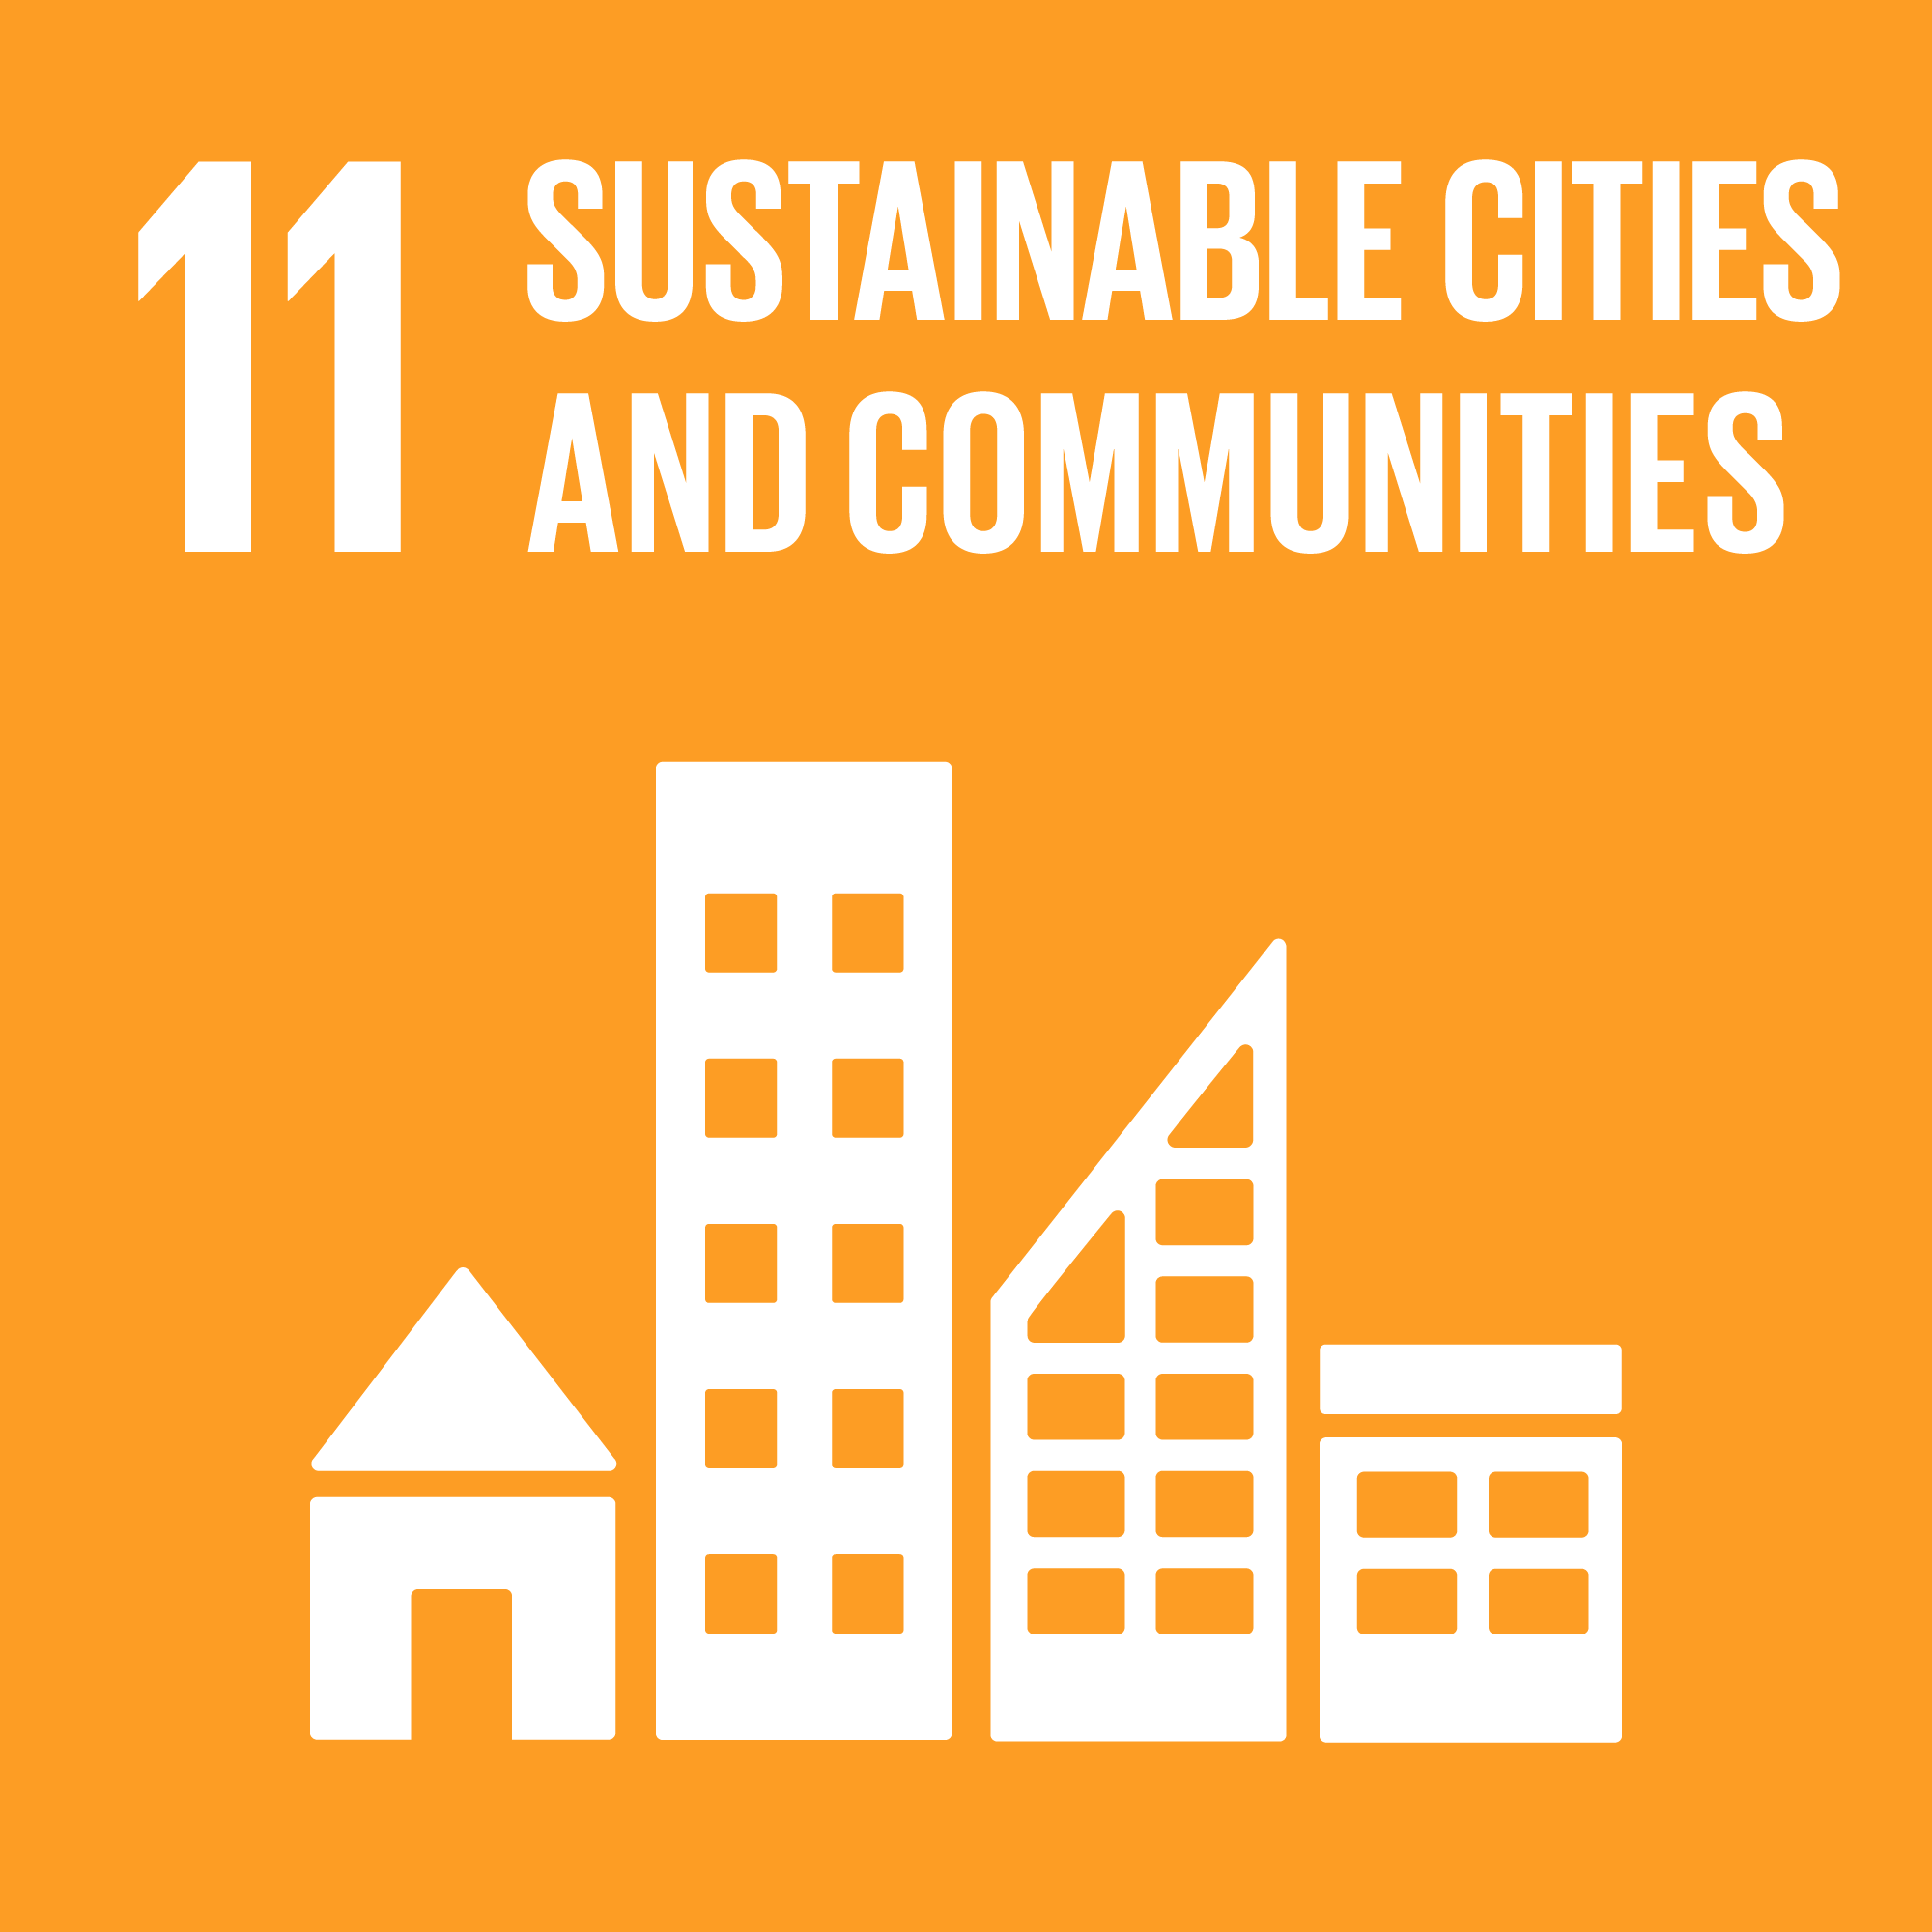 Agenda 2030 goal number 11: sustainable cities and communities 